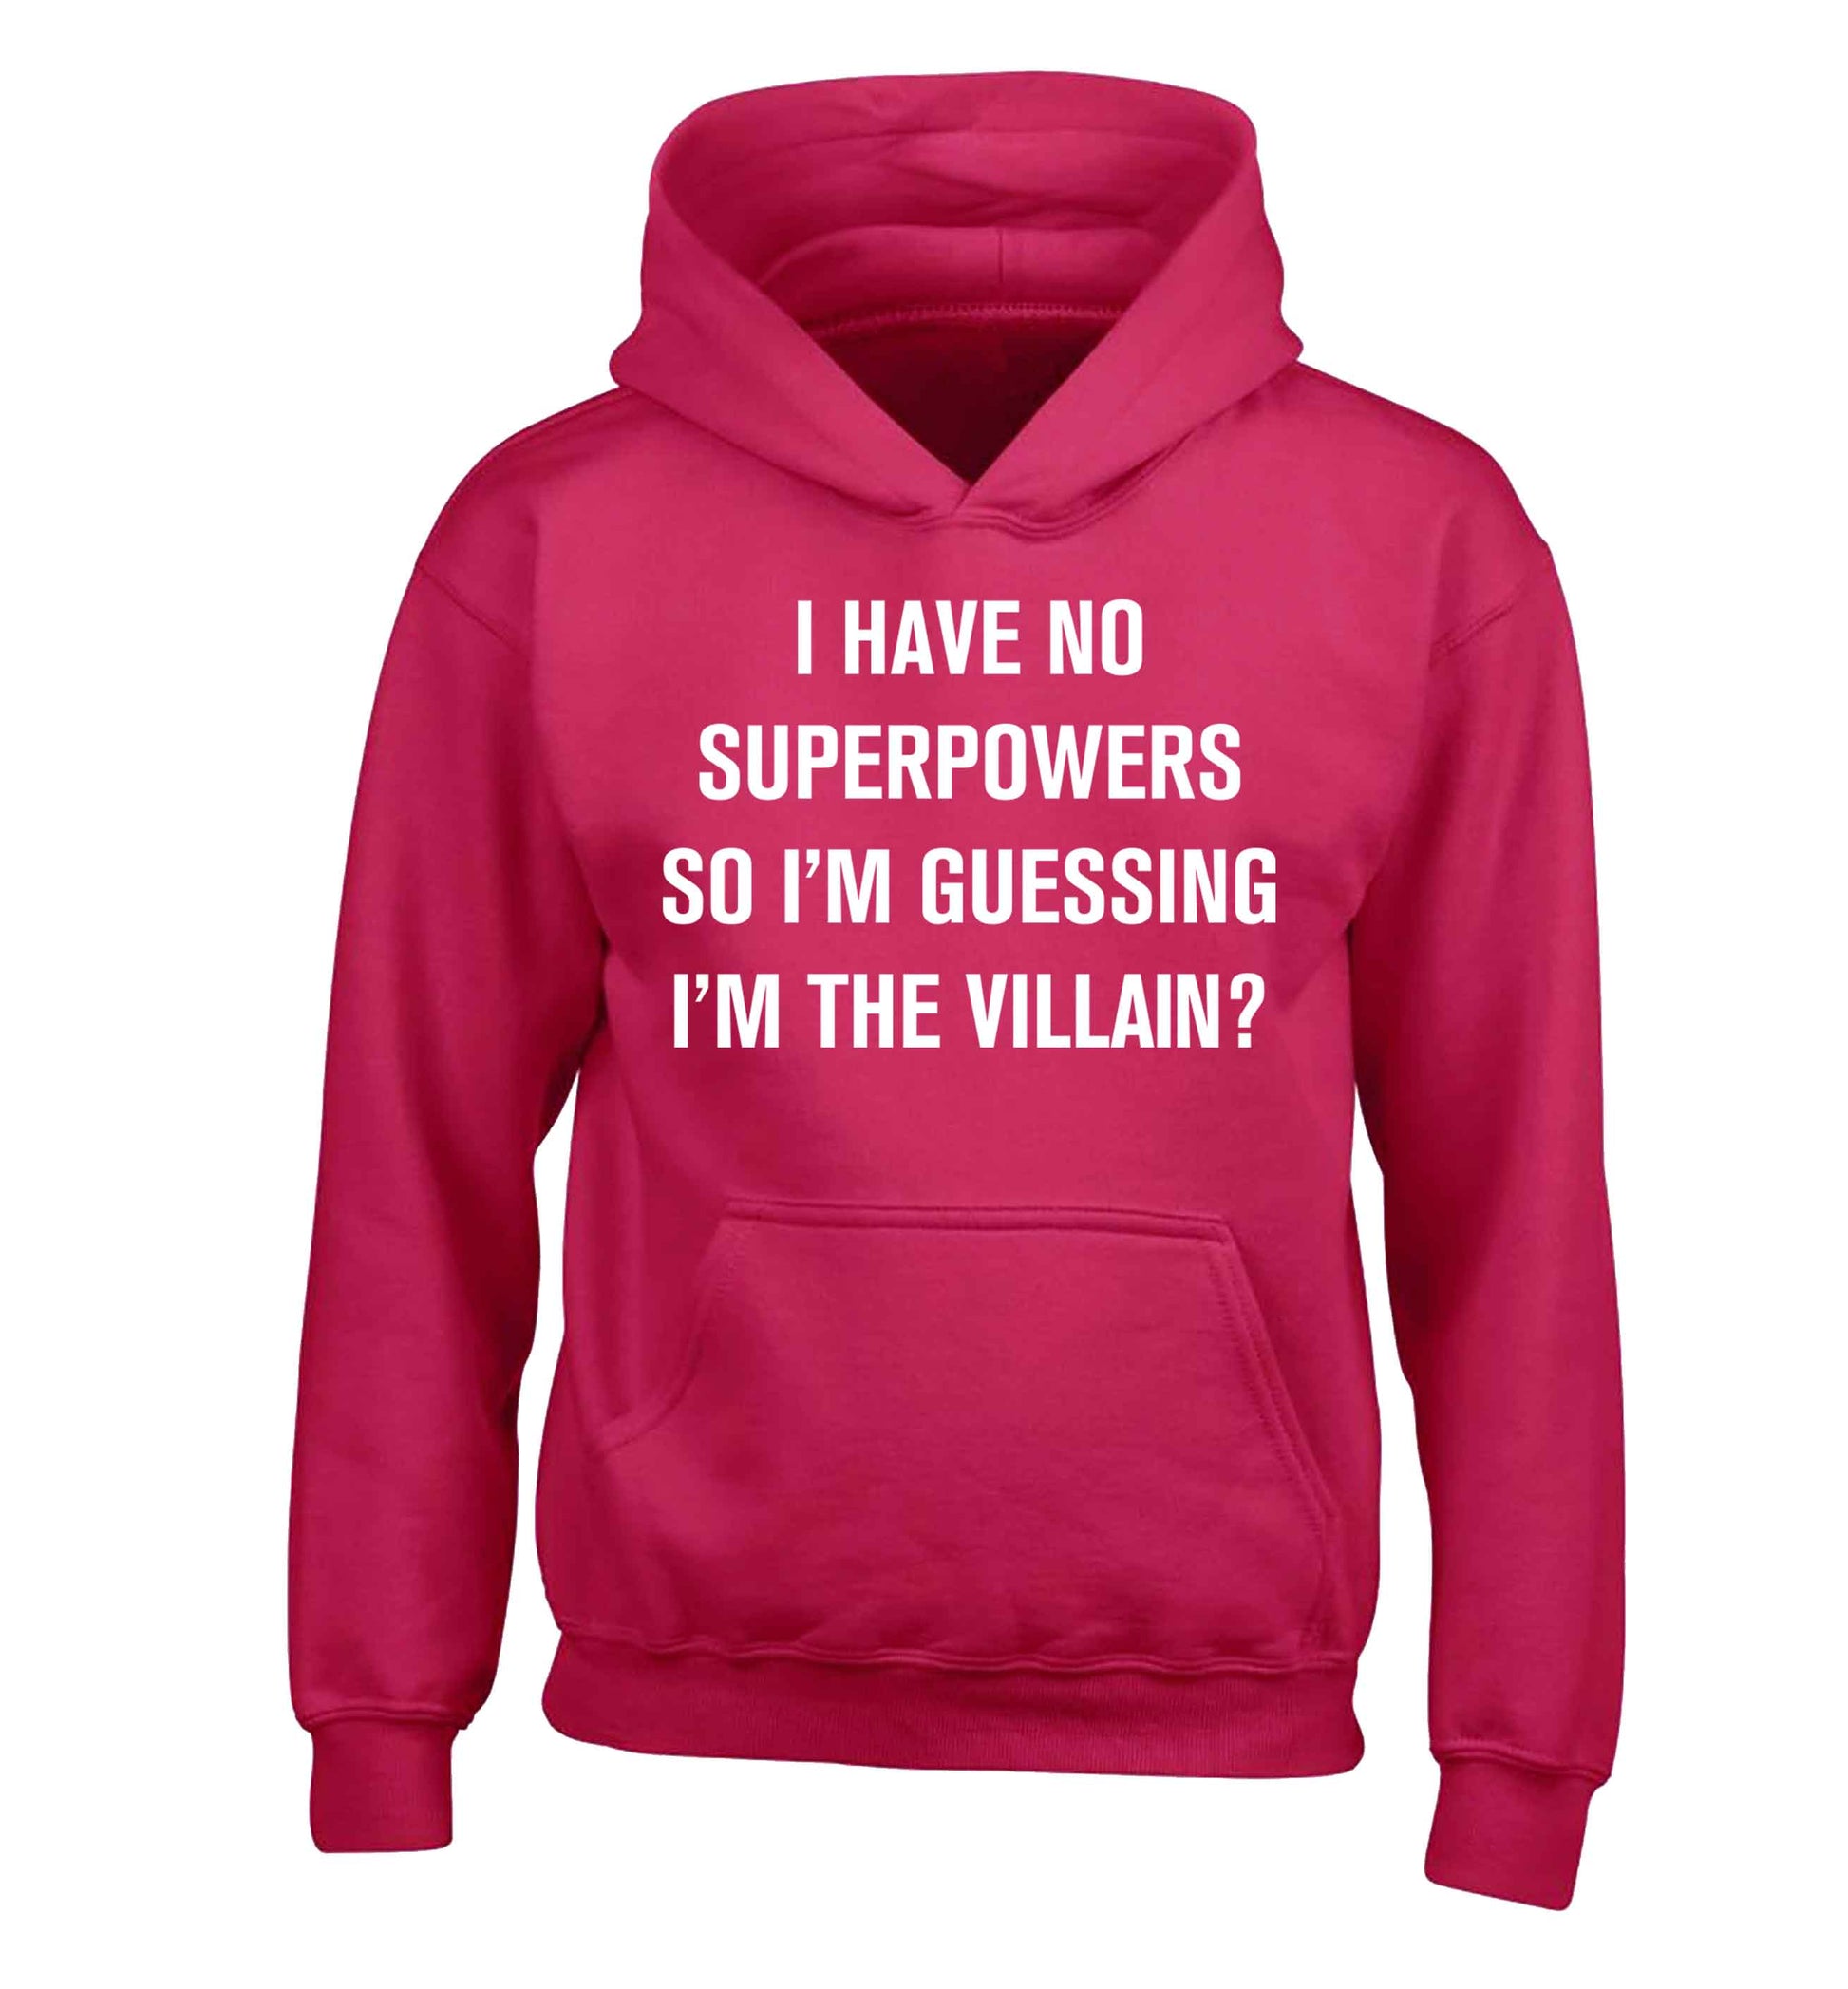 I have no superpowers so I'm guessing I'm the villain? children's pink hoodie 12-13 Years